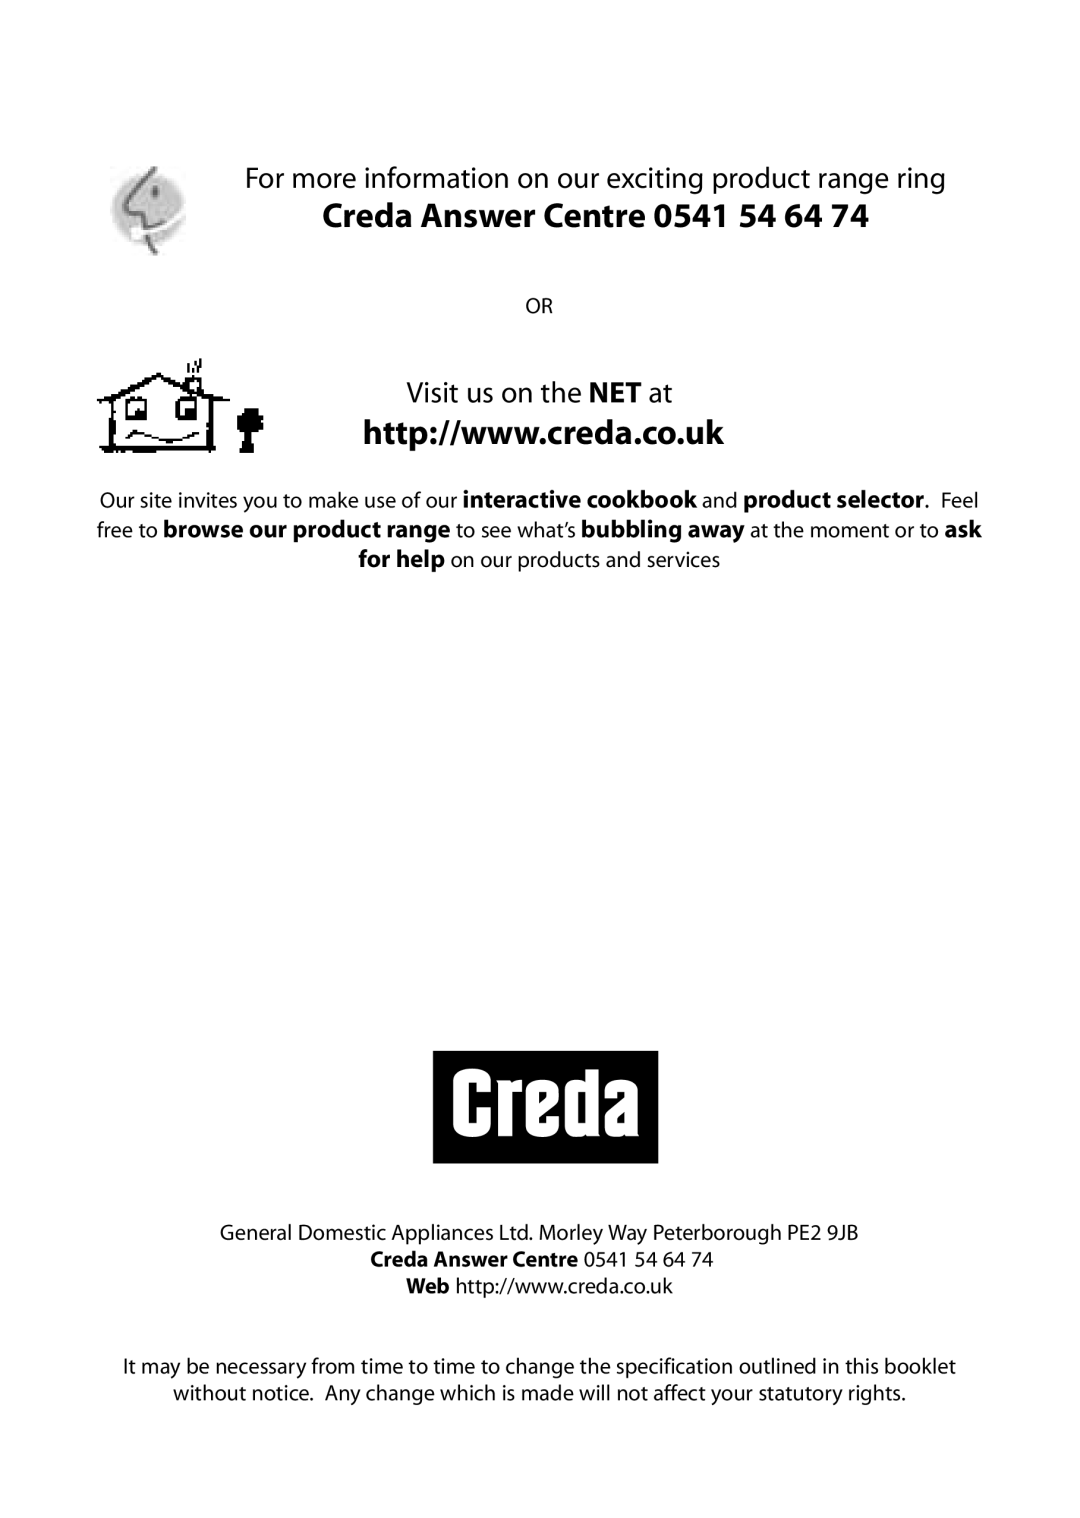 Creda D130E manual Creda Answer Centre, For more information on our exciting product range ring, Visit us on the NET at 